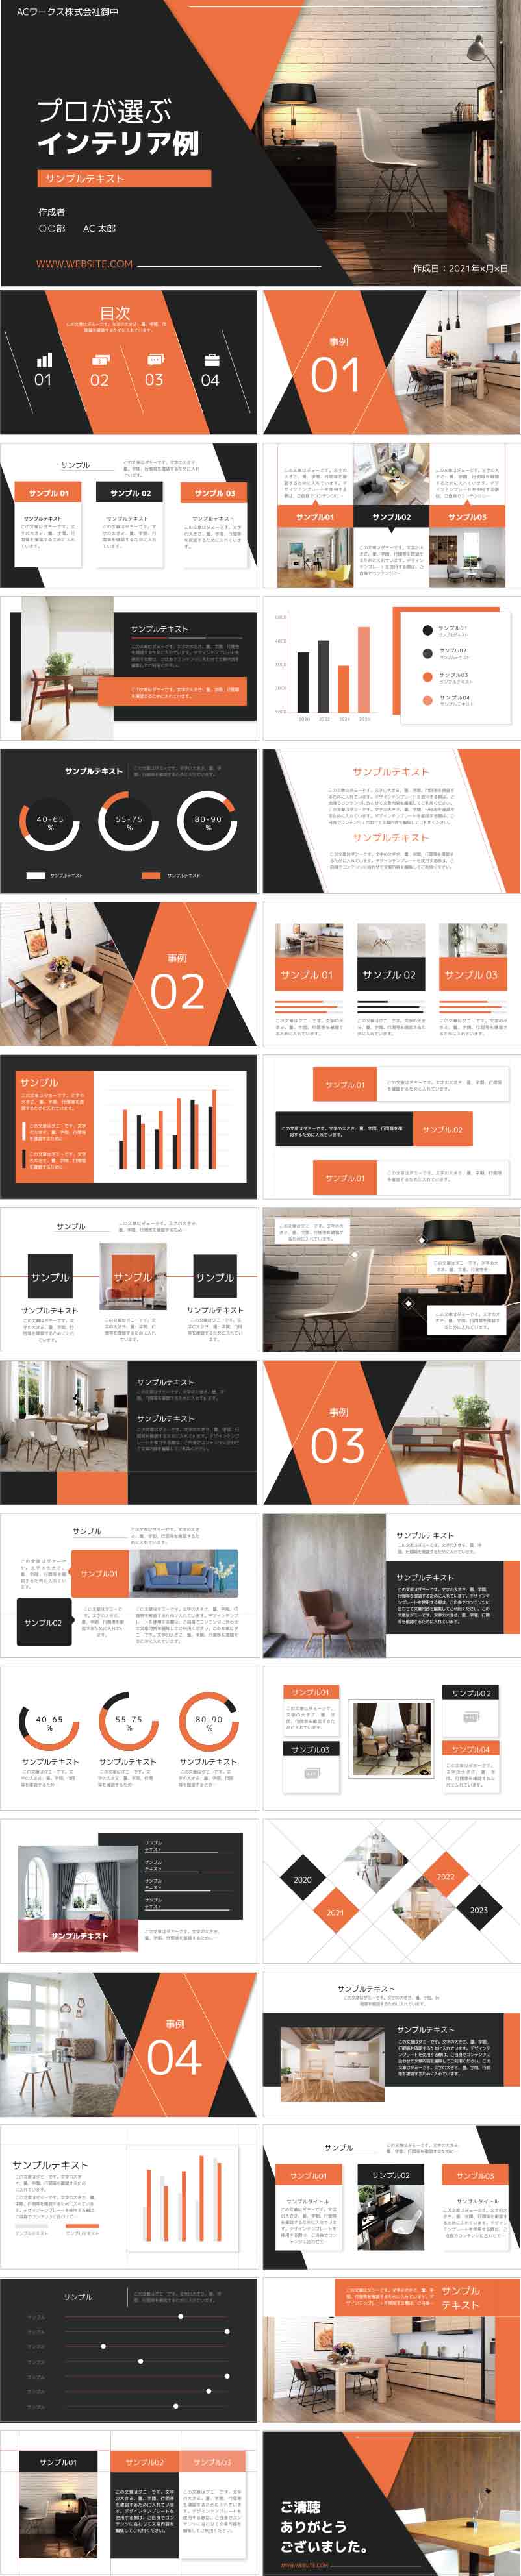 PowerPoint template vol.72